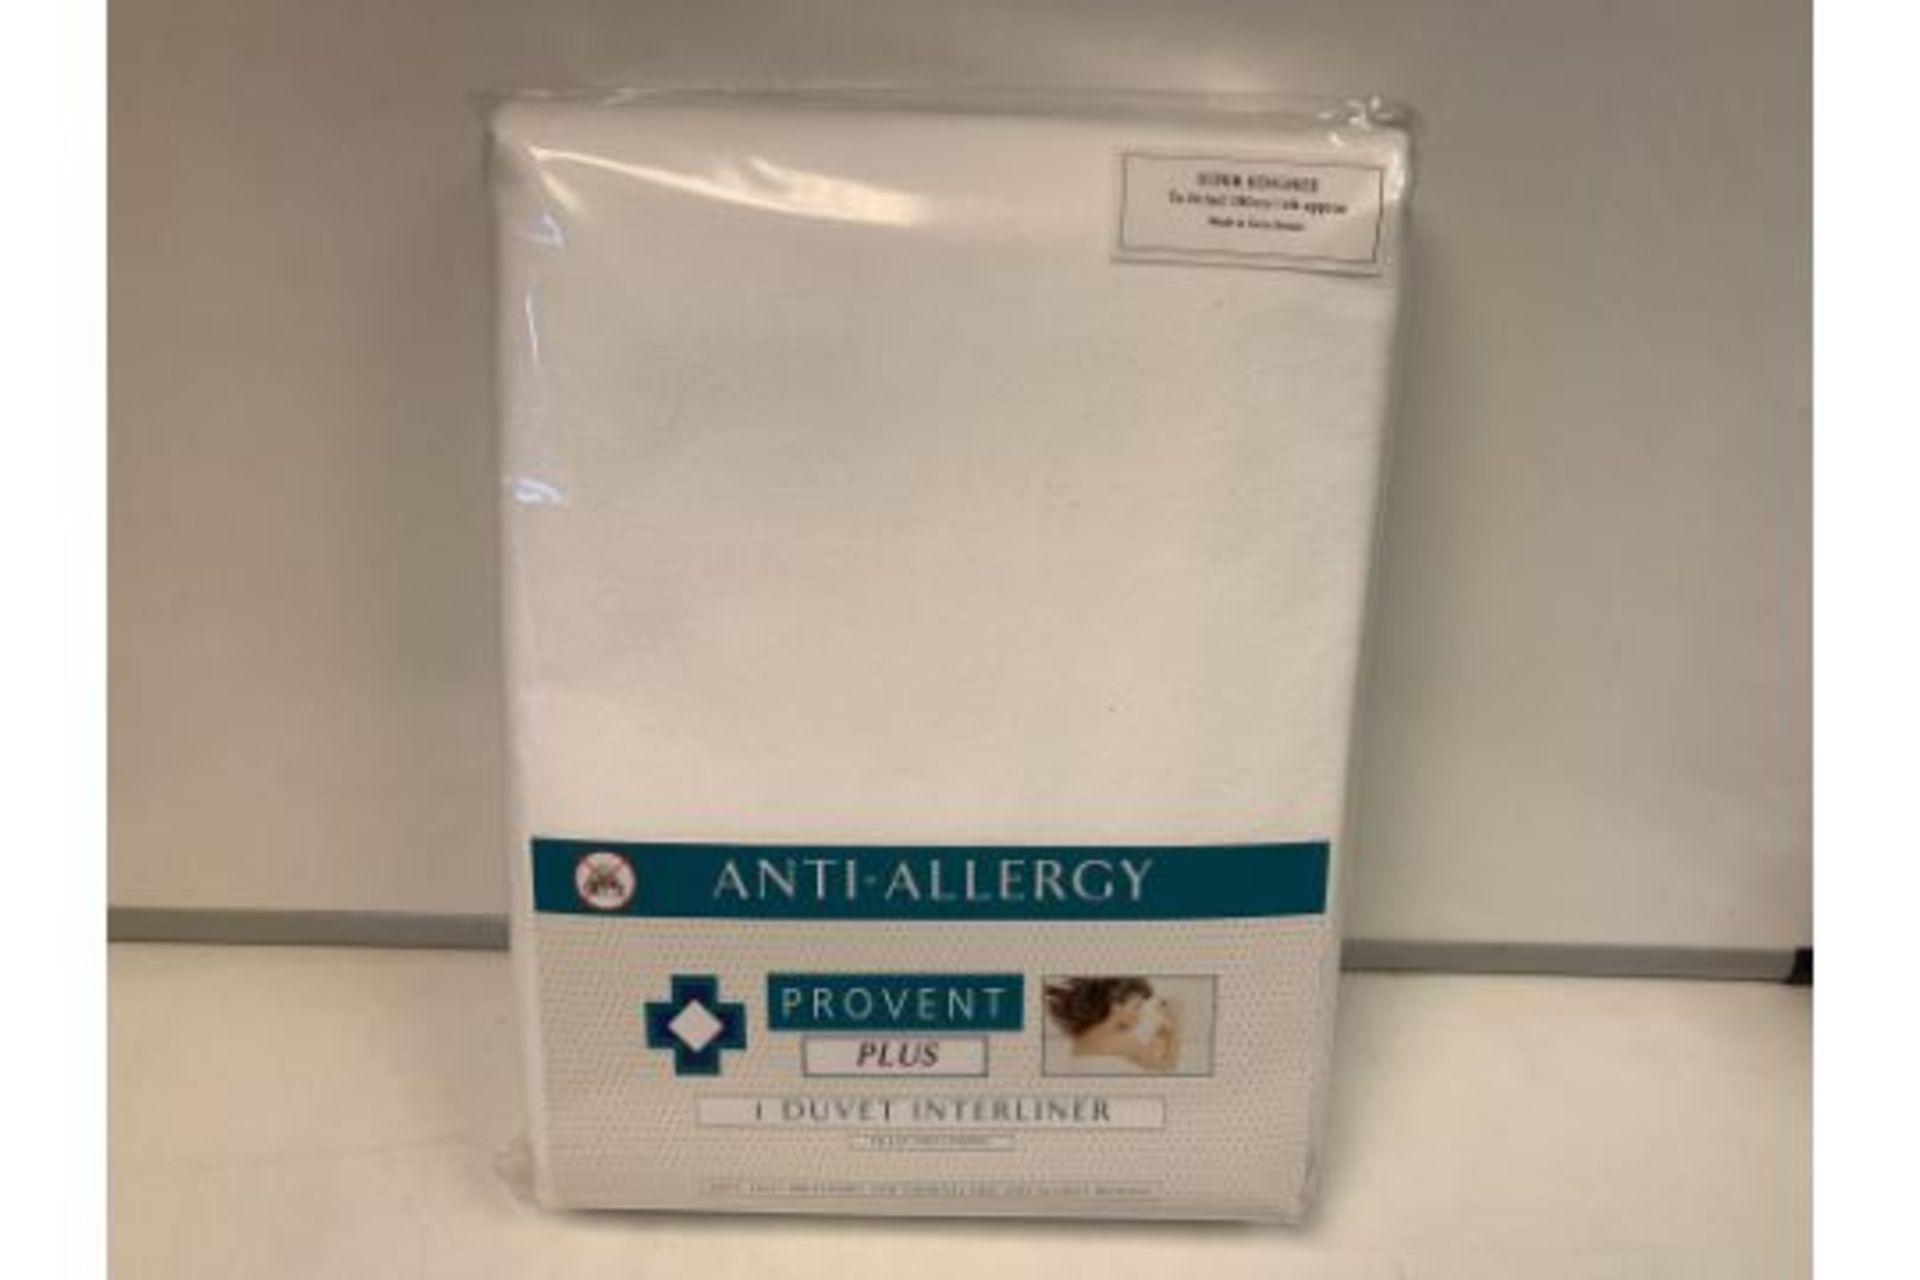 12 X NEW PACKAGED ANTI-ALLERGY PROVENT PLUS MATTERESS INTERLINER. SUPER KING SIZE (879/30)